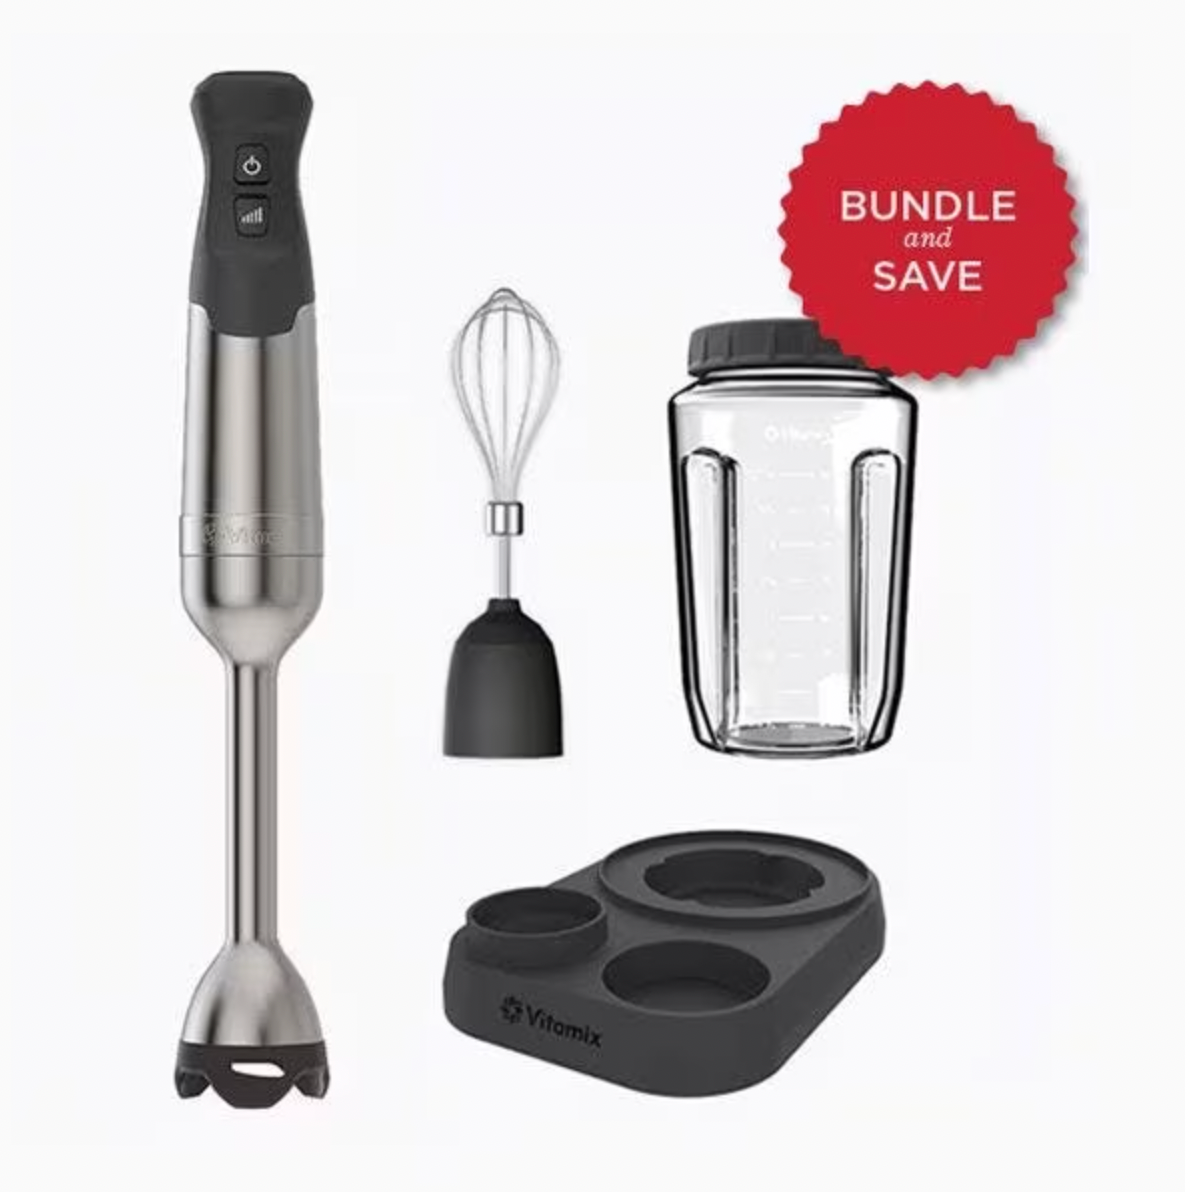 Vitamix Personal Cup Review- Save 15% - Eat, Drink, and Save Money